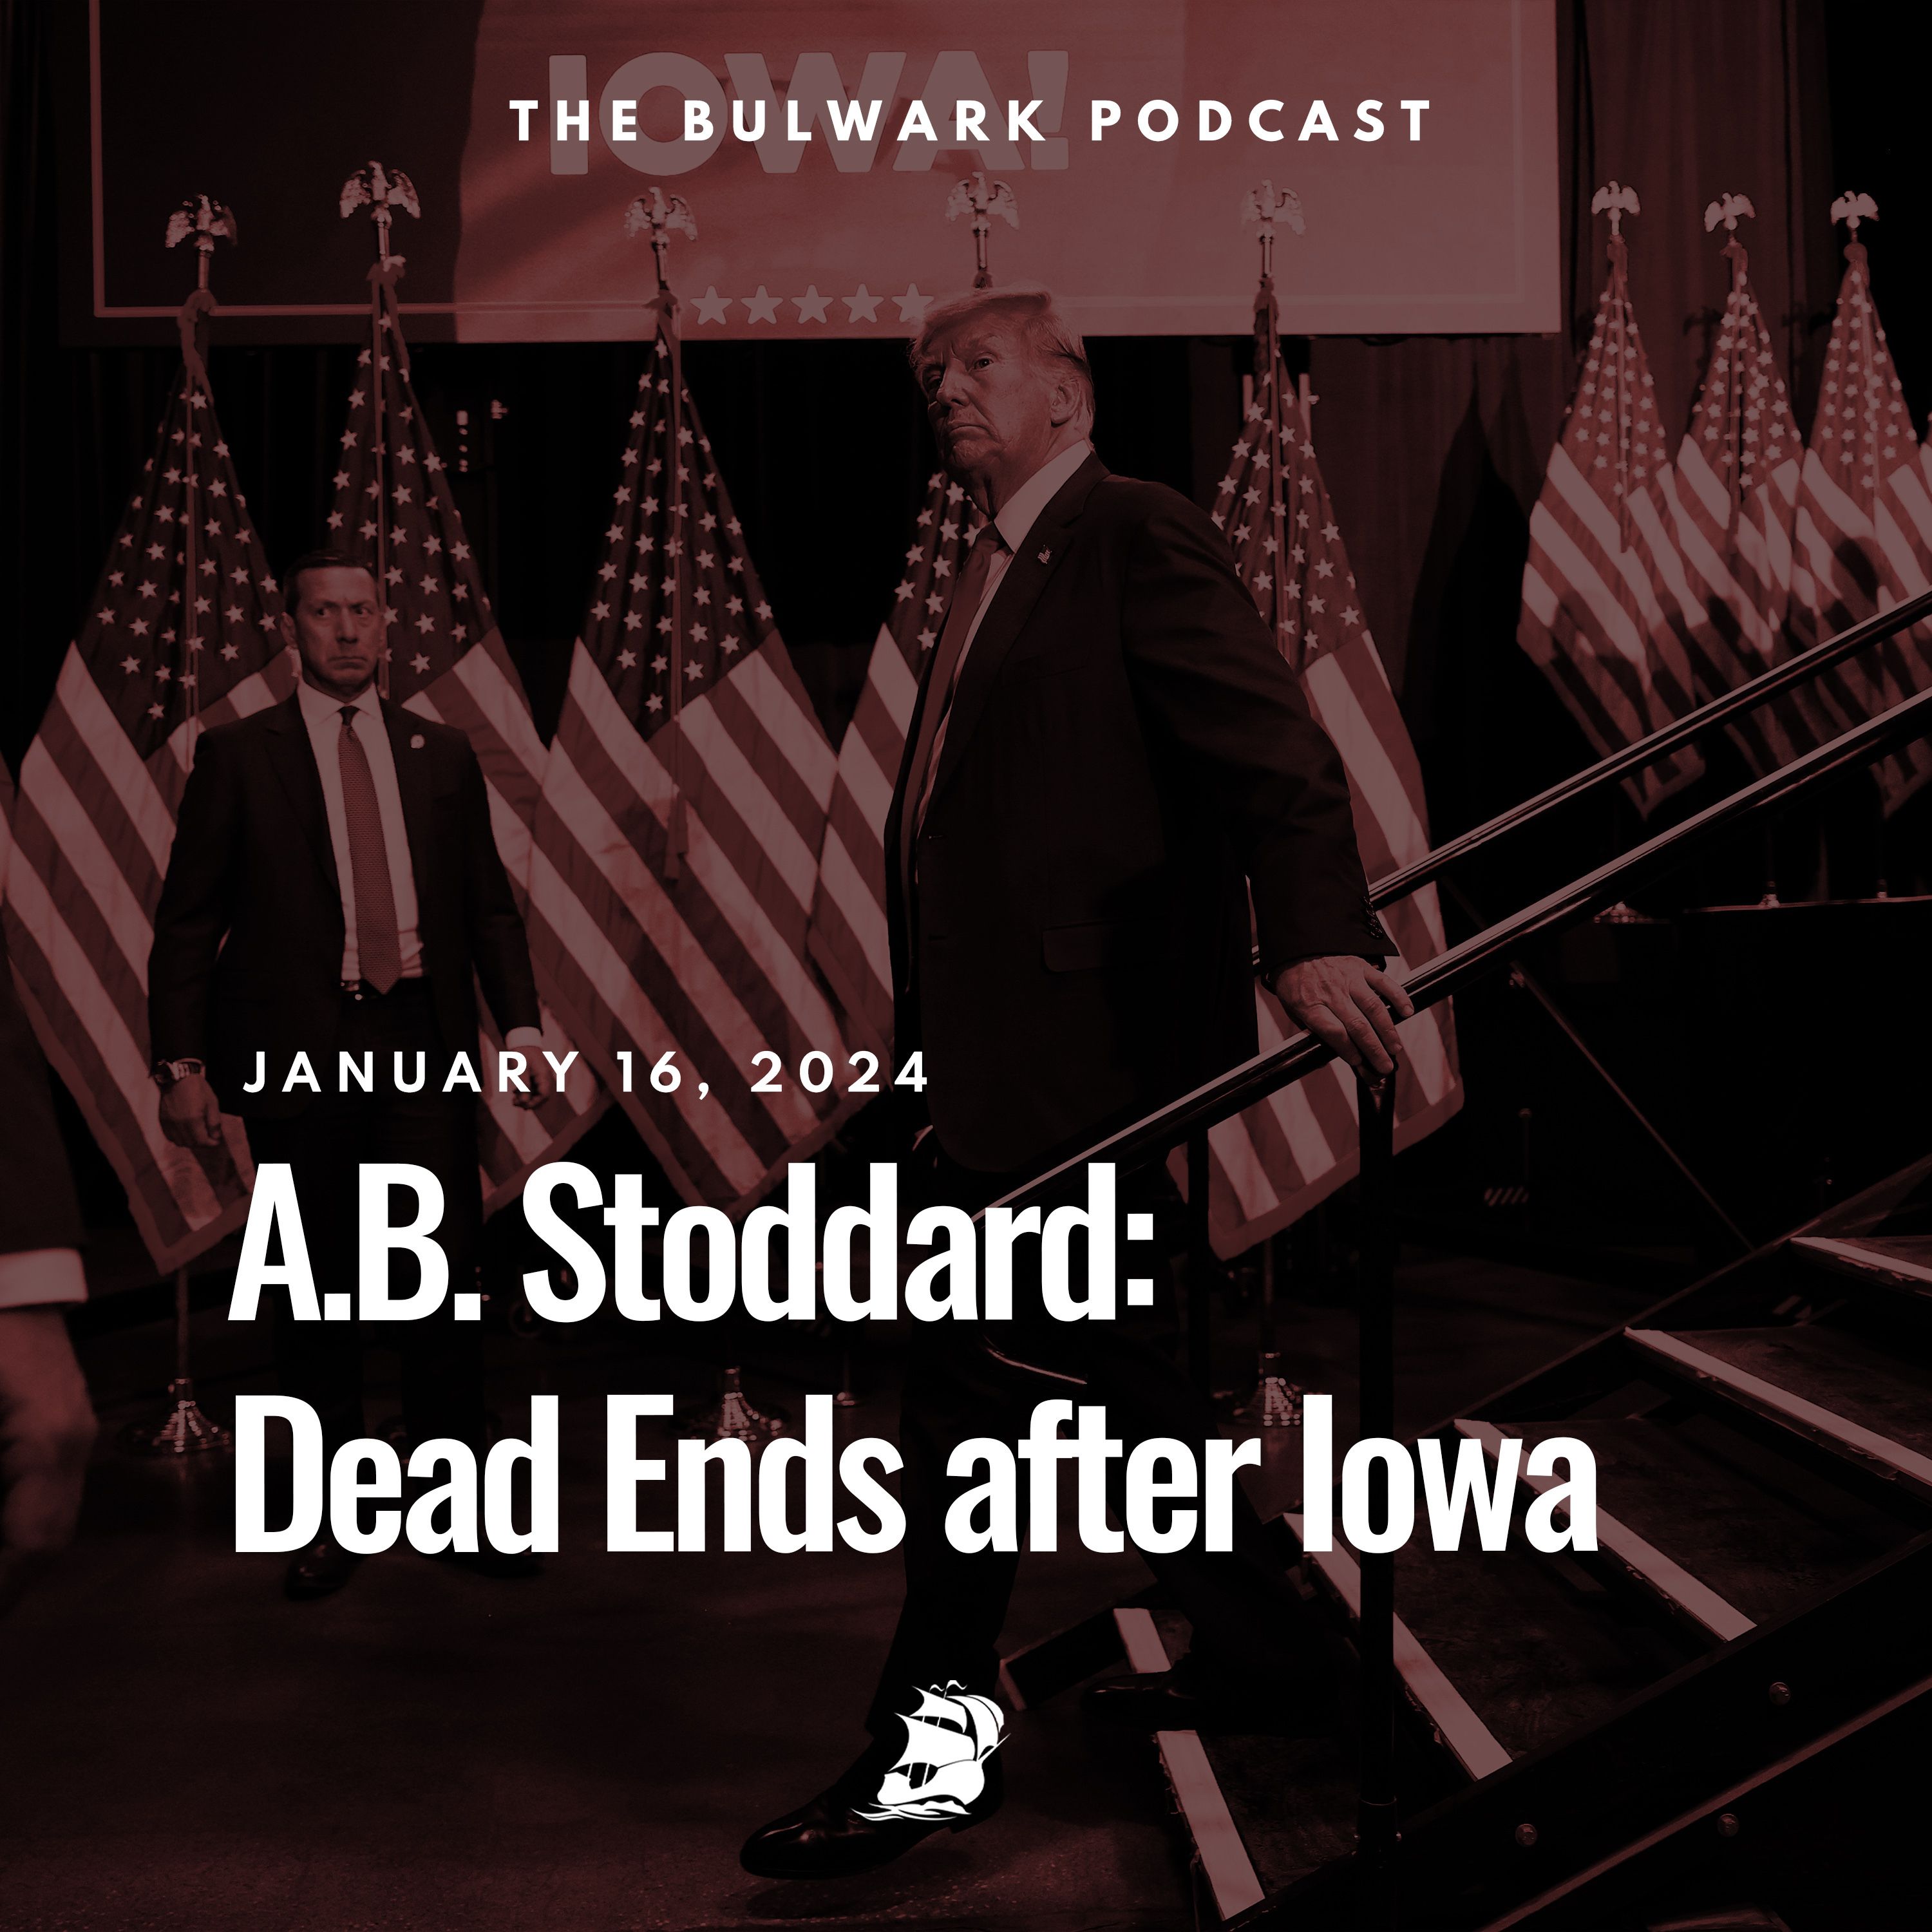 A.B. Stoddard: Dead Ends after Iowa by The Bulwark Podcast